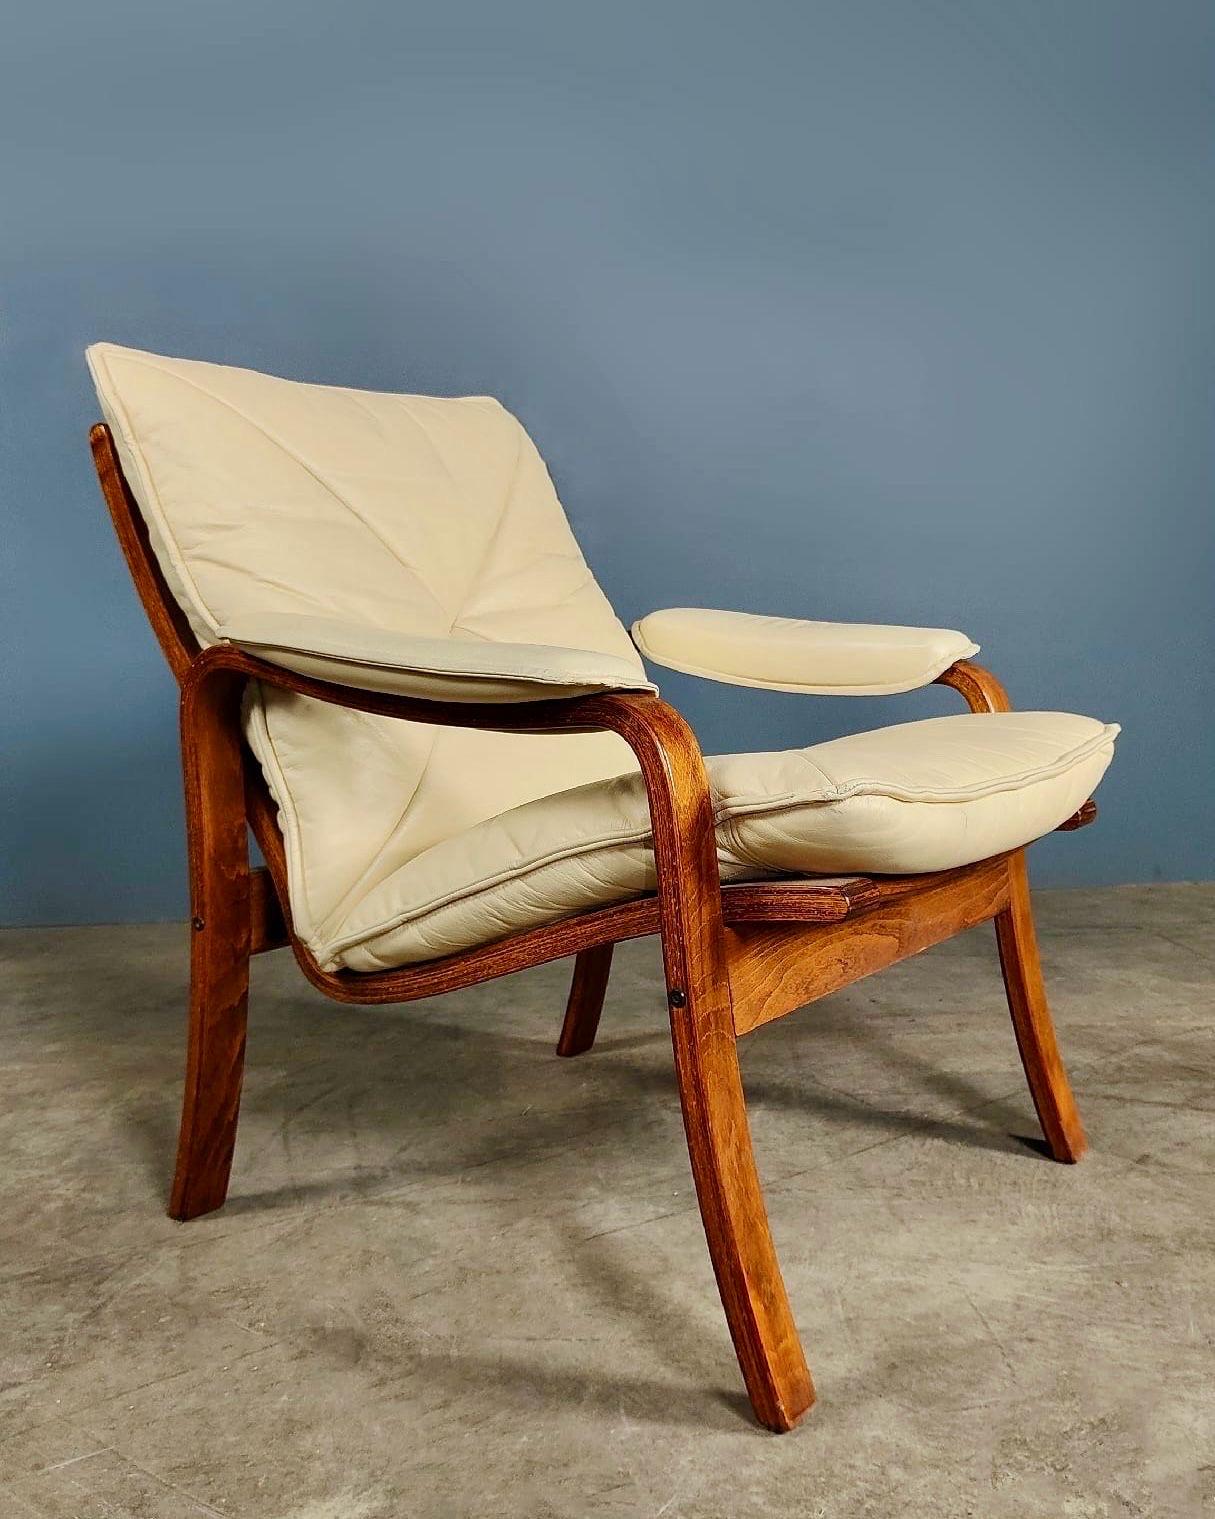 New Stock ✅

Lied Mobler of Norway Armchair Leather Teak Mid Century Vintage Retro MCM

This, very rare, stylish and incredibly comfortable chair, was designed by Soda Galvano, and was made in Norway by Lied Mobler in the early 1960s.

Solid stained